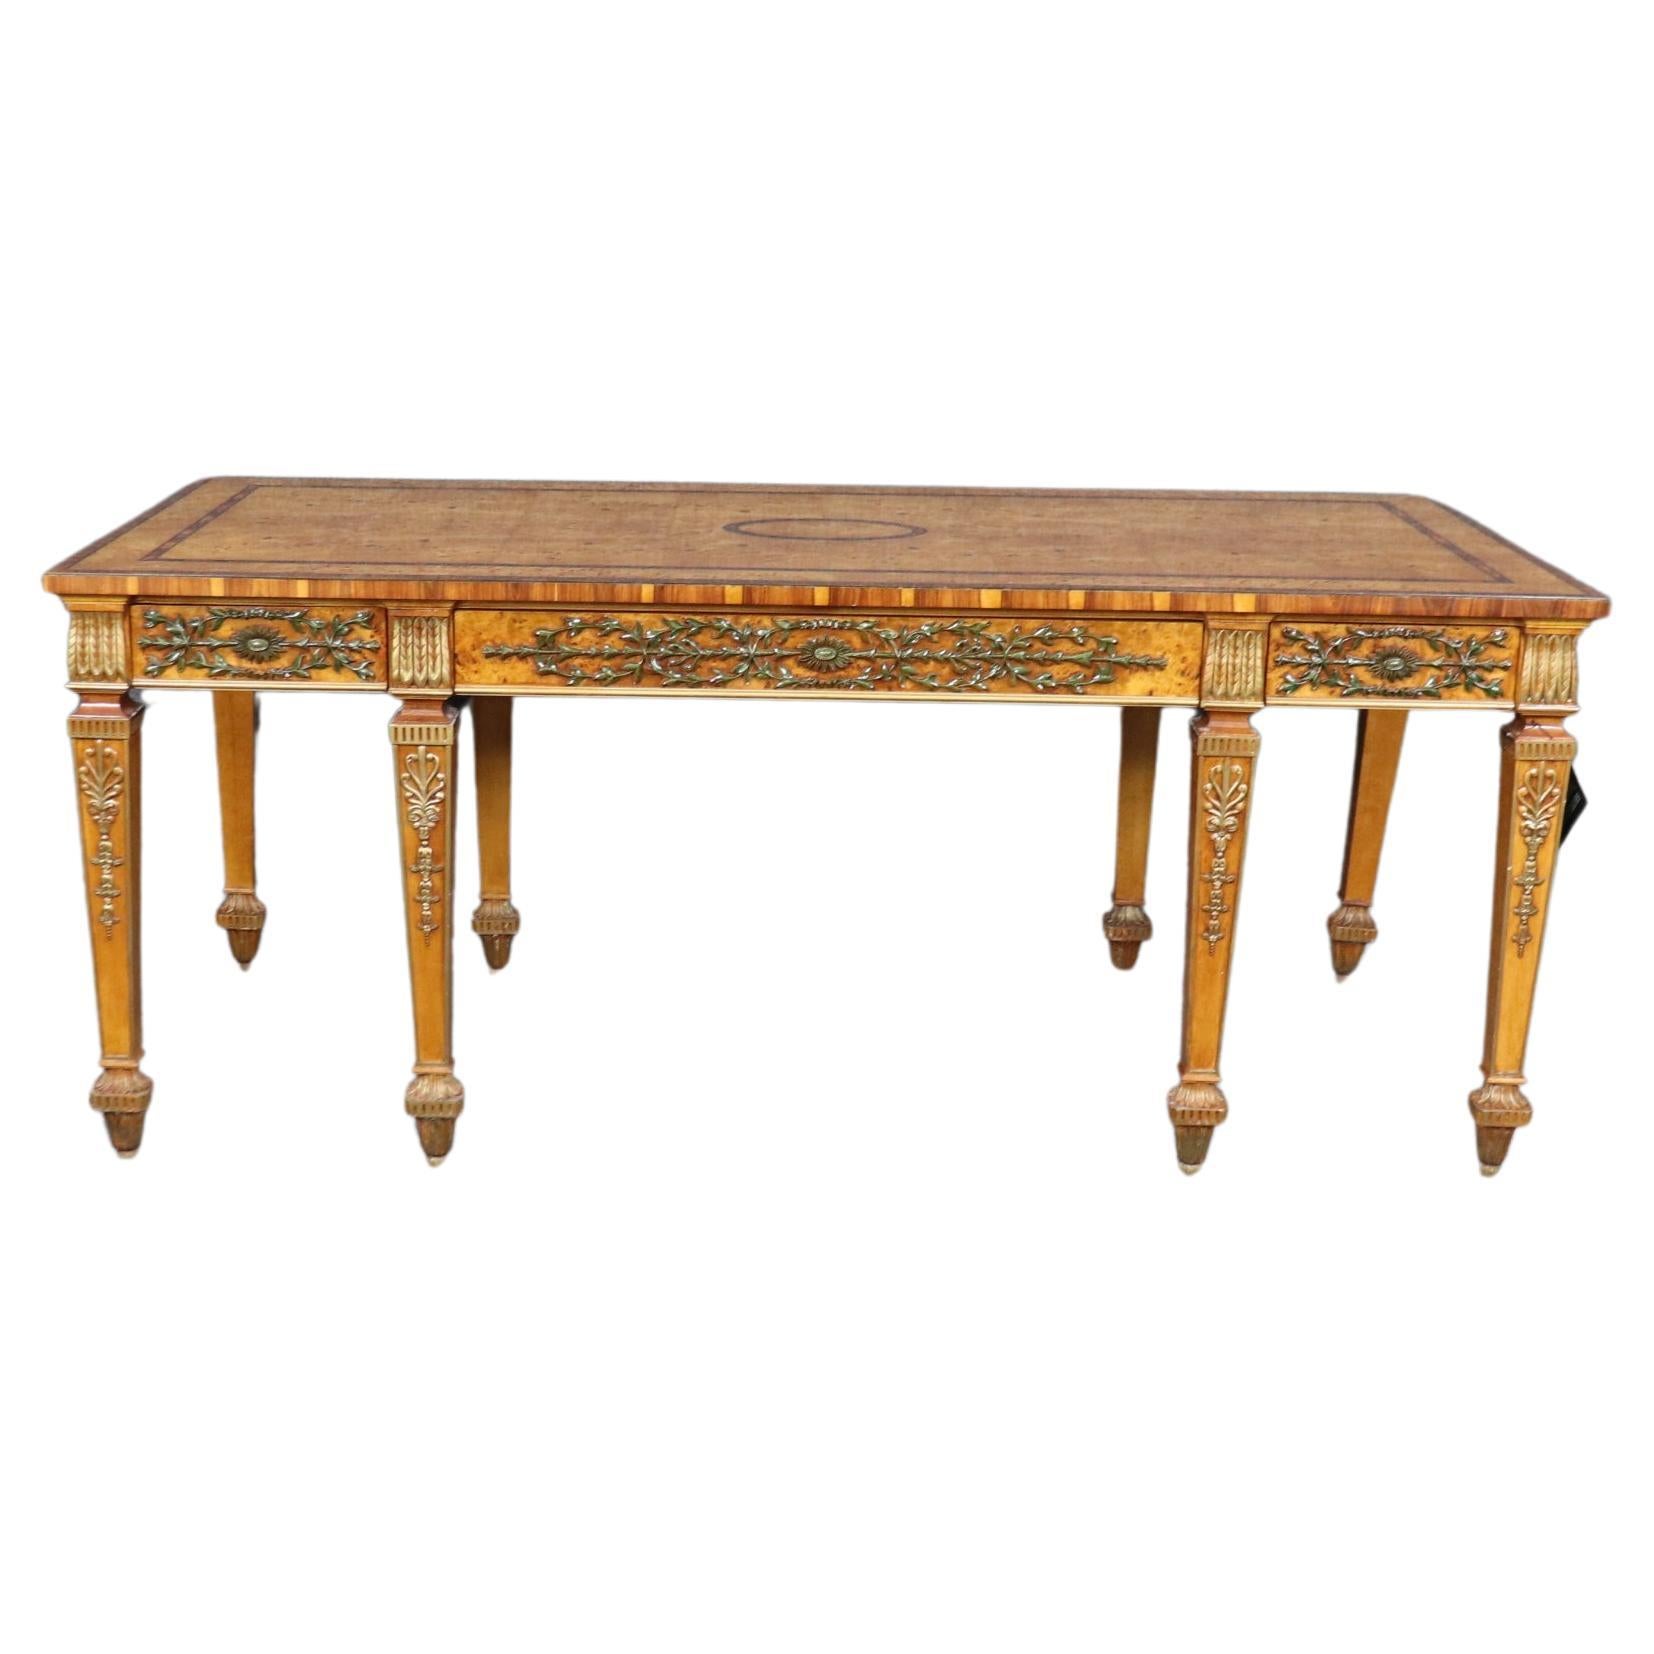 Henredon Grand Provenance Anglais Style Adams Decorated Carved Writing Desk 